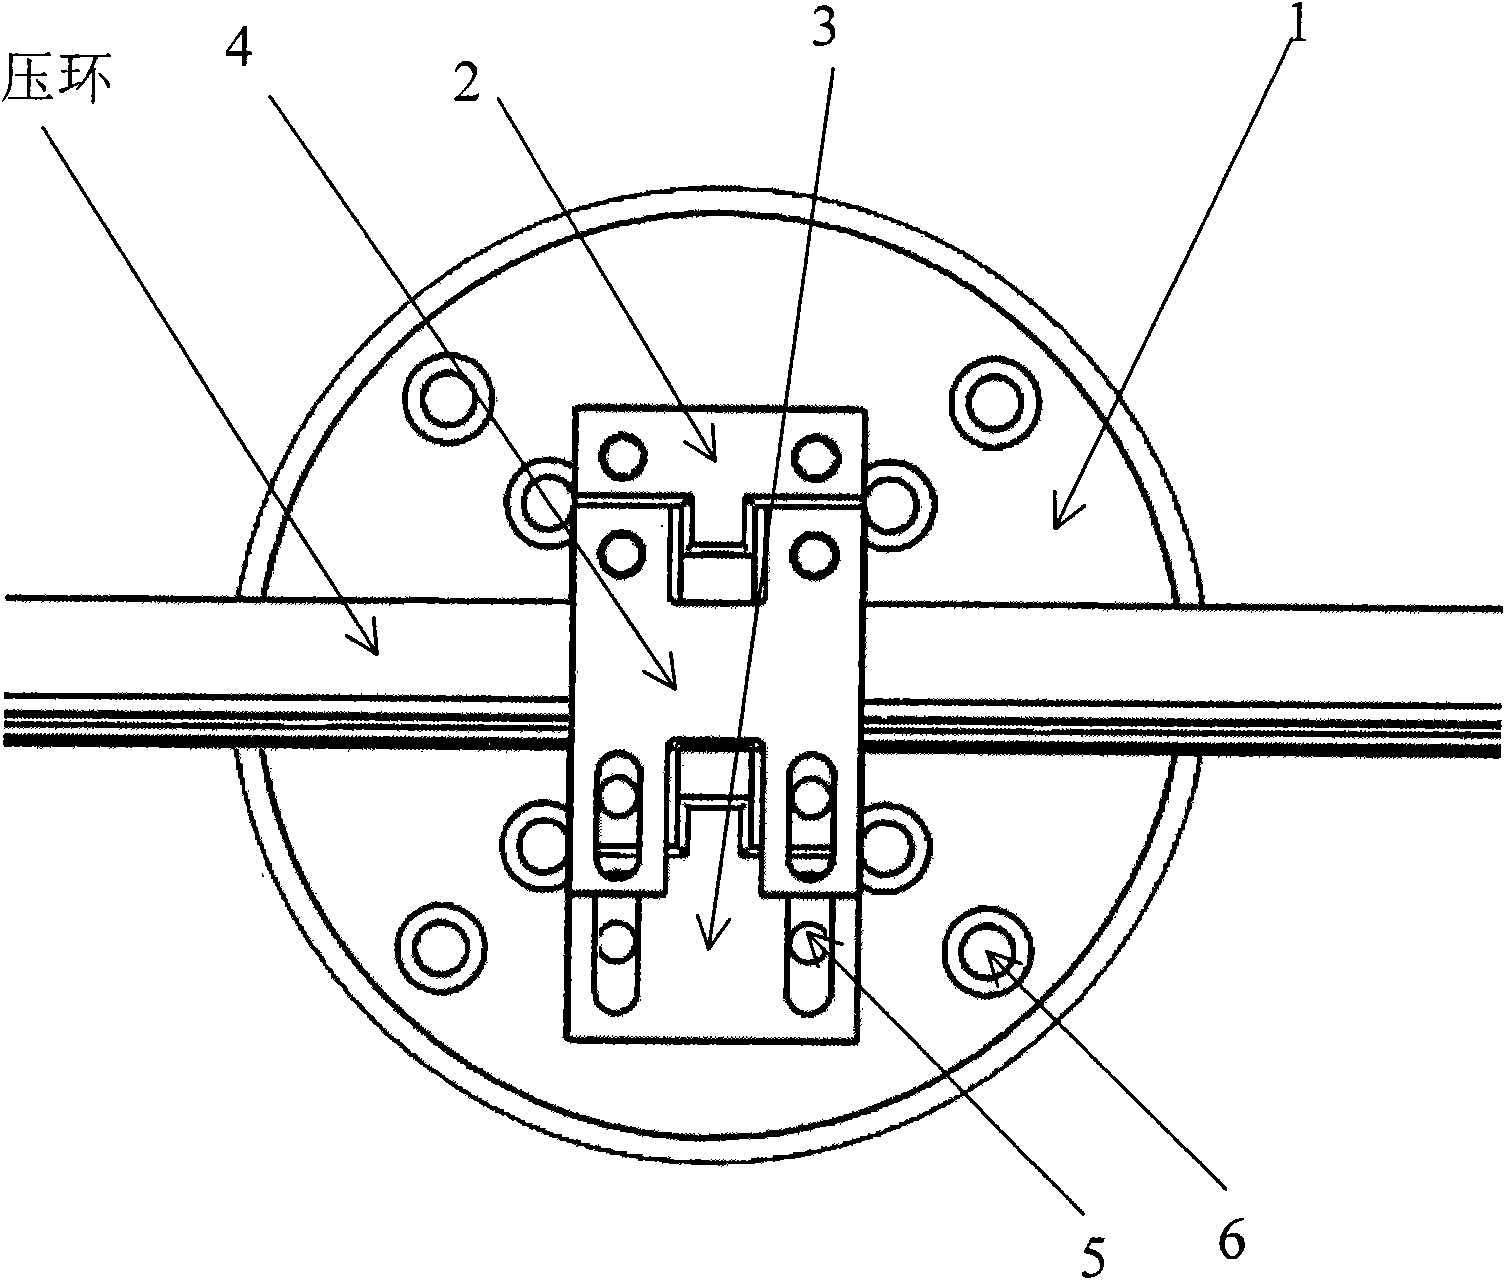 Clamping device in vibration distressing of satellite mechanical experiment pressure ring